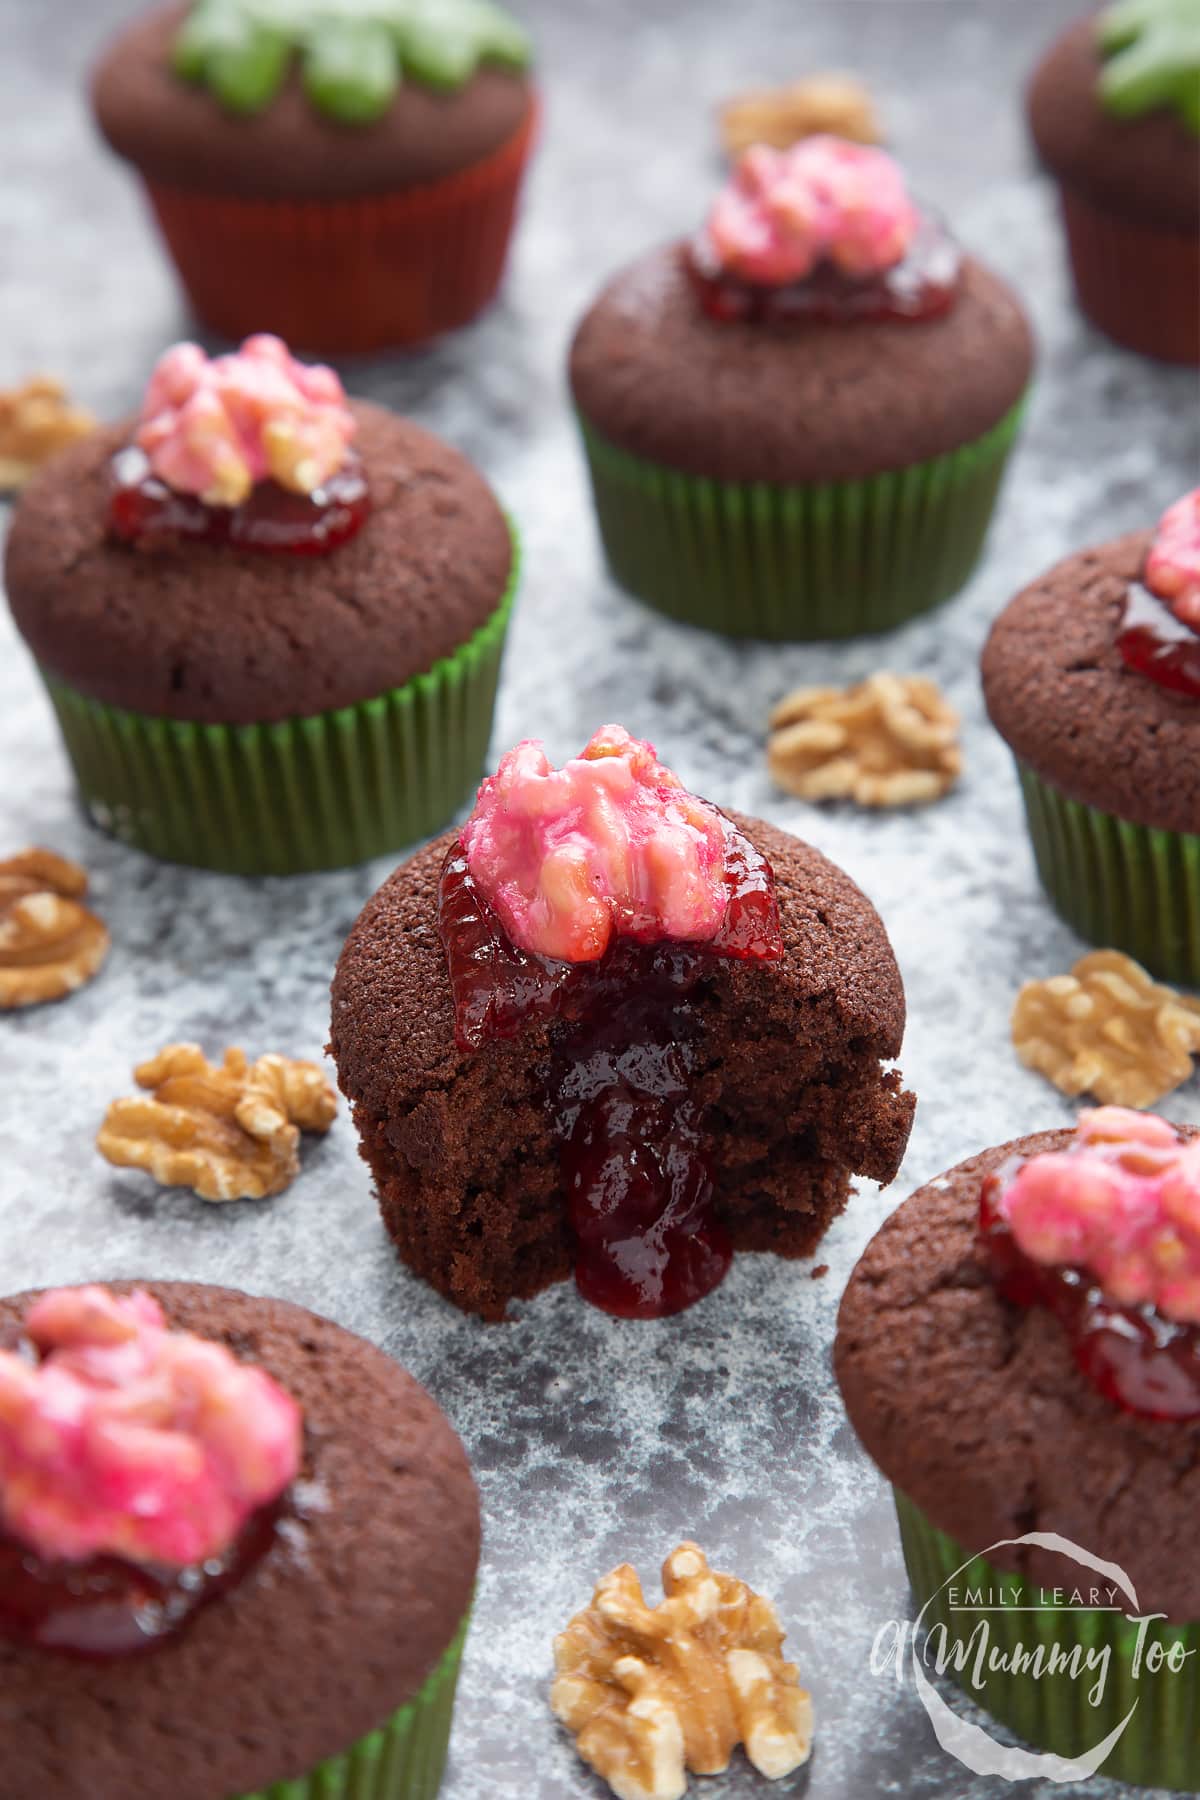 Gory brain cupcakes - chocolate cupcakes filled with jam and decorated with candied walnut halves.